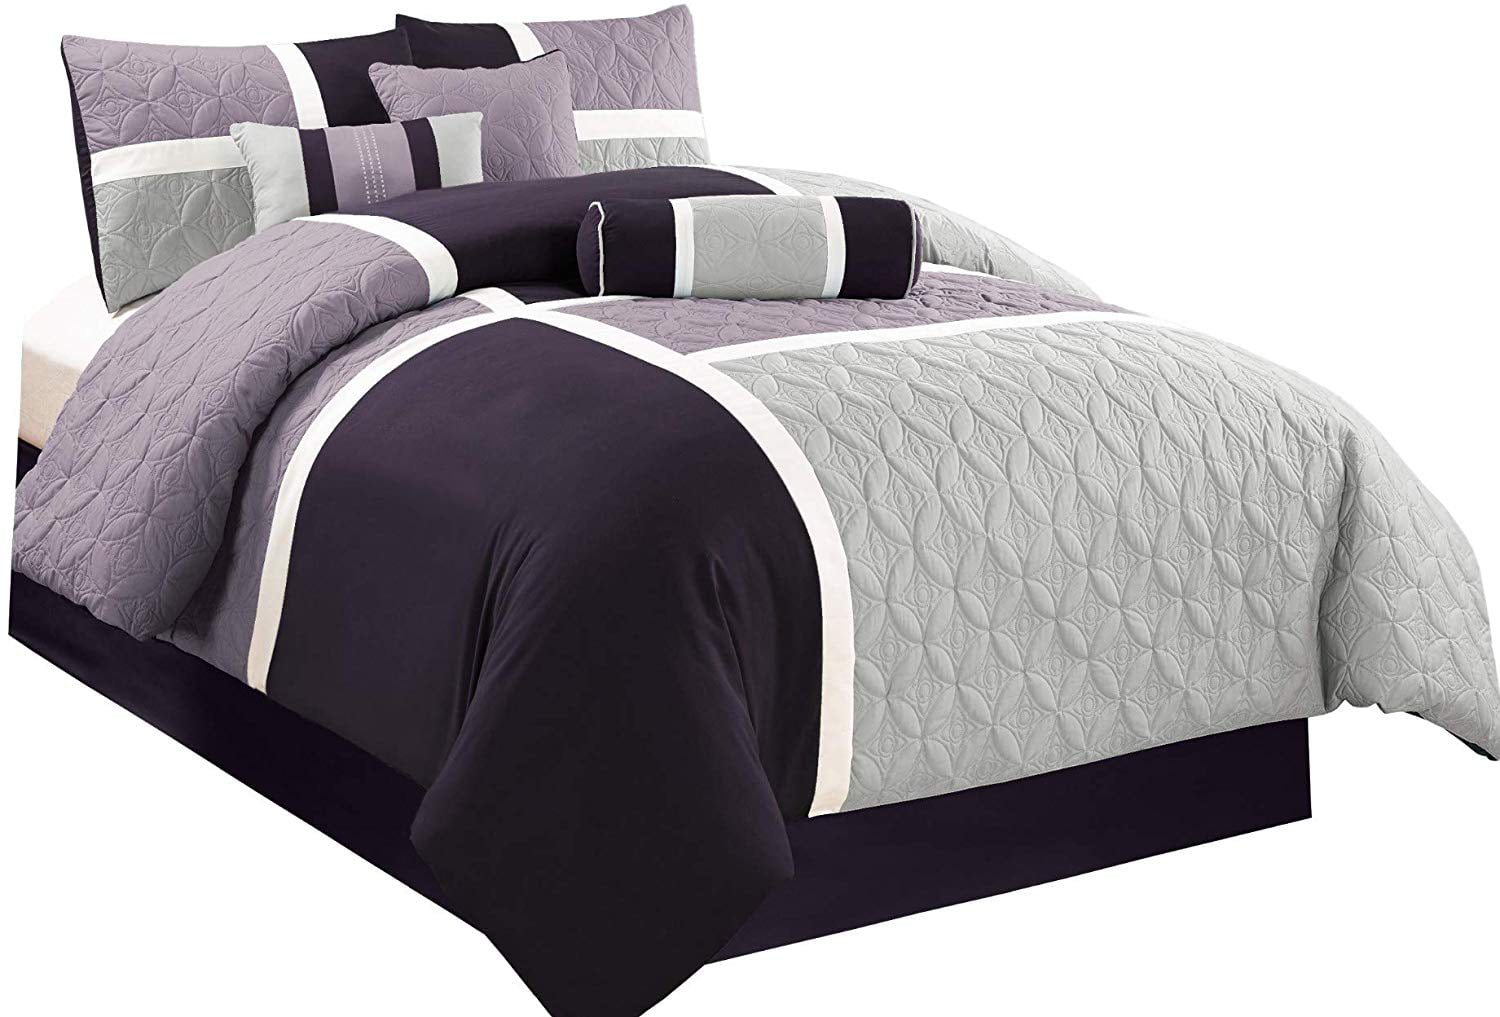 Chezmoi Collection Upland 7-Piece Quilted Patchwork Comforter Set Lavender/Gray/Purple California King 